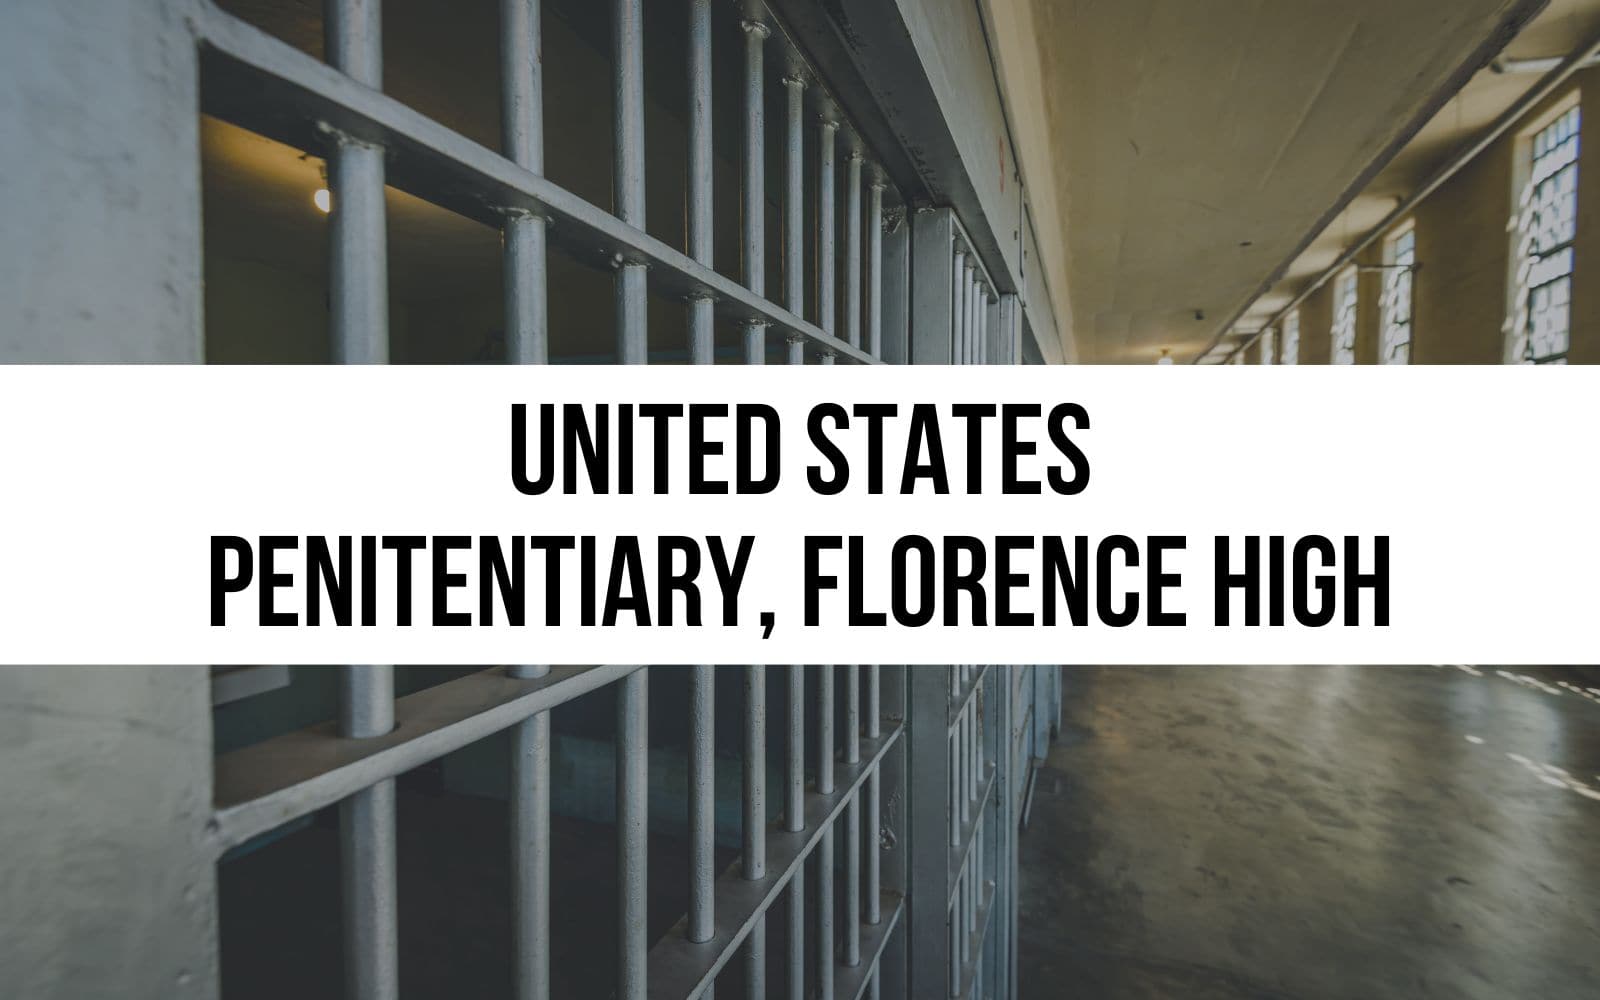 United States Penitentiary, Florence High